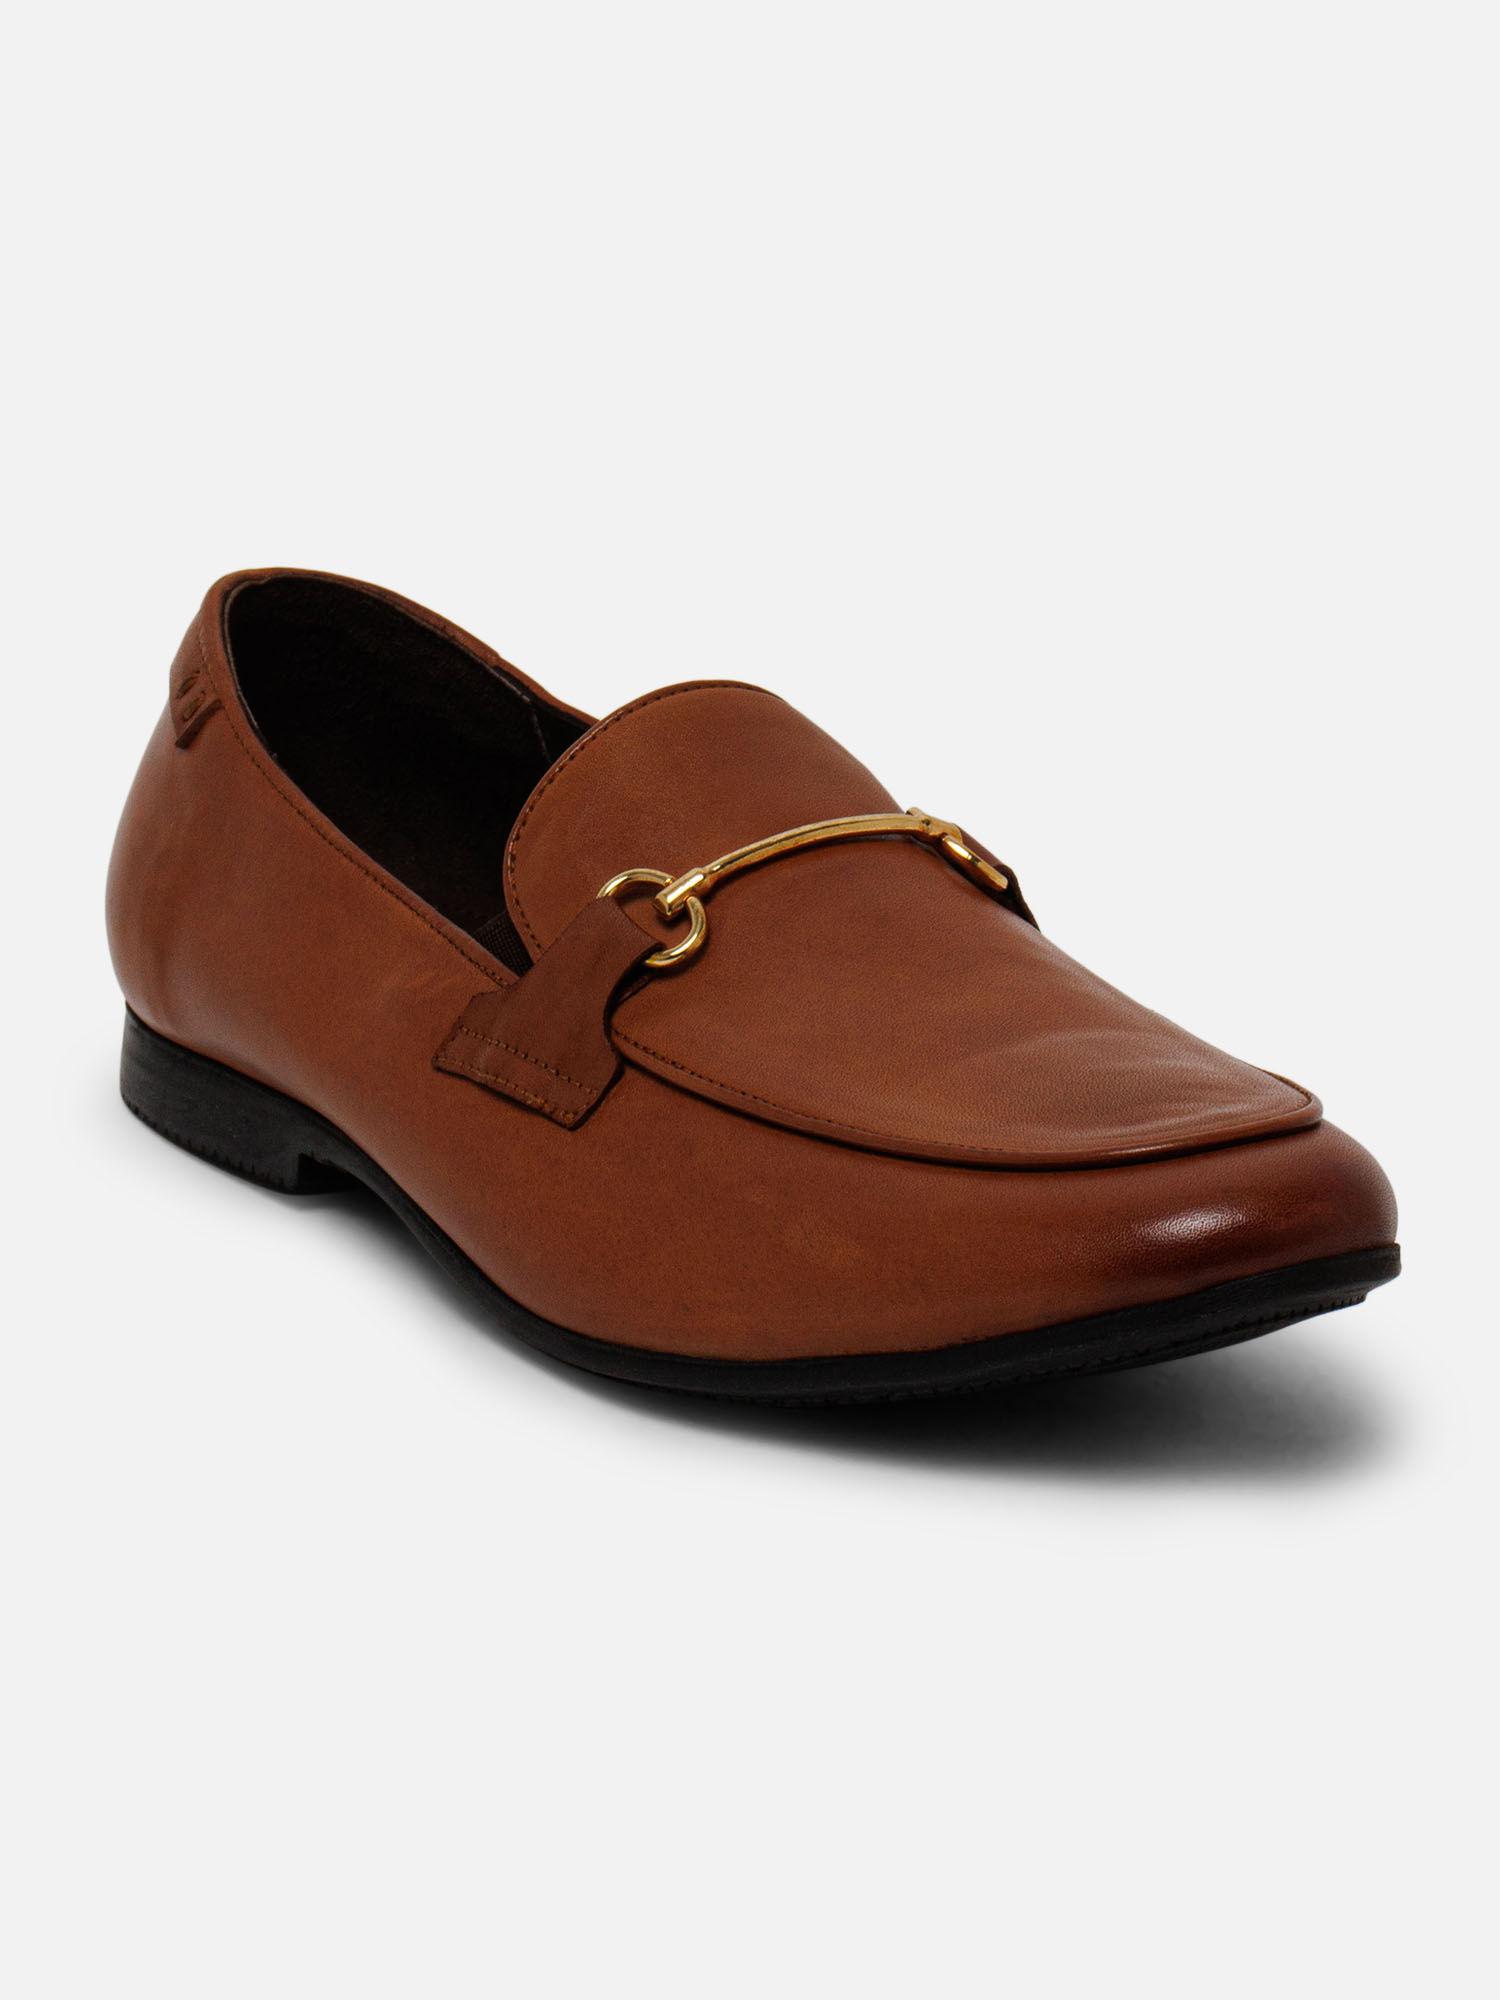 solid tan leather casual loafers for men